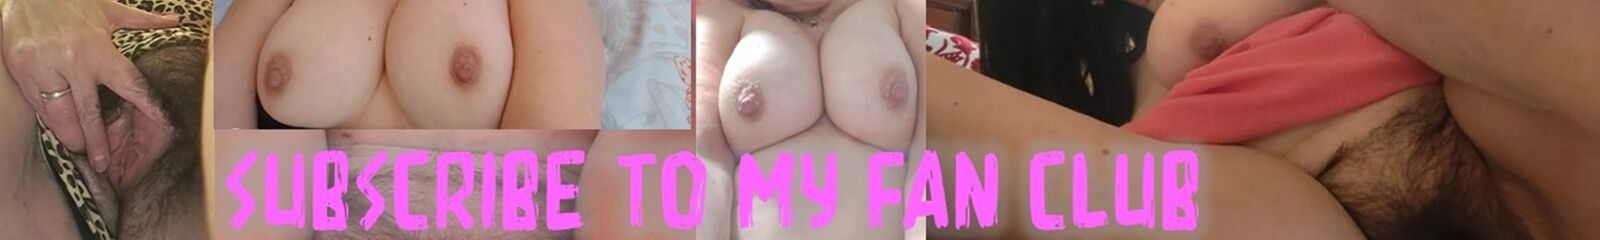 Mommy big hairy pussy